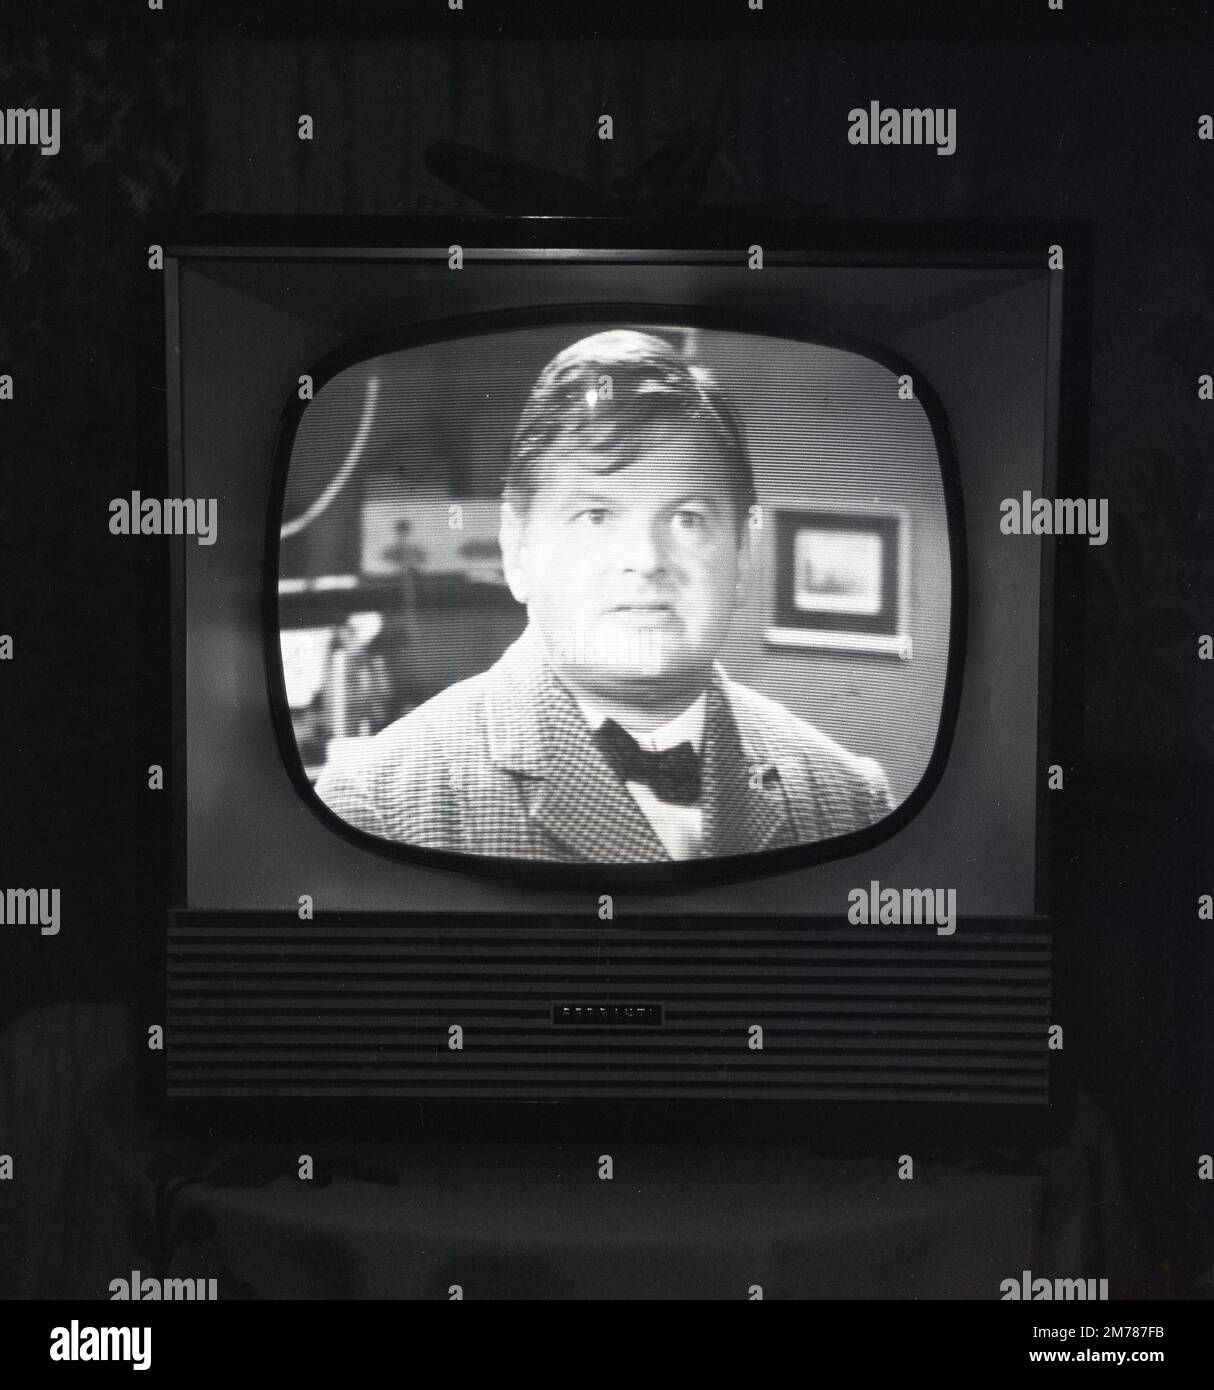 1957, historical, the comedian Benny Hill on BBC television being broadcast on a Briitsh made Ferranti  television set. A sketch comedy programme, The Benny Hill Show was first broadacst on the BBC in 1955. Benny Hill would go on to become one of the most popular figures on British television, with one of his 1970s show's being watched by 21 million viewers. Founded in 1882, Lancashire based Ferraniti, was a leading valve, radio and television manufacturer,  later to become a major British electrical engineering company. It's radio and television set division was sold to rival ECKO in 1957. Stock Photo